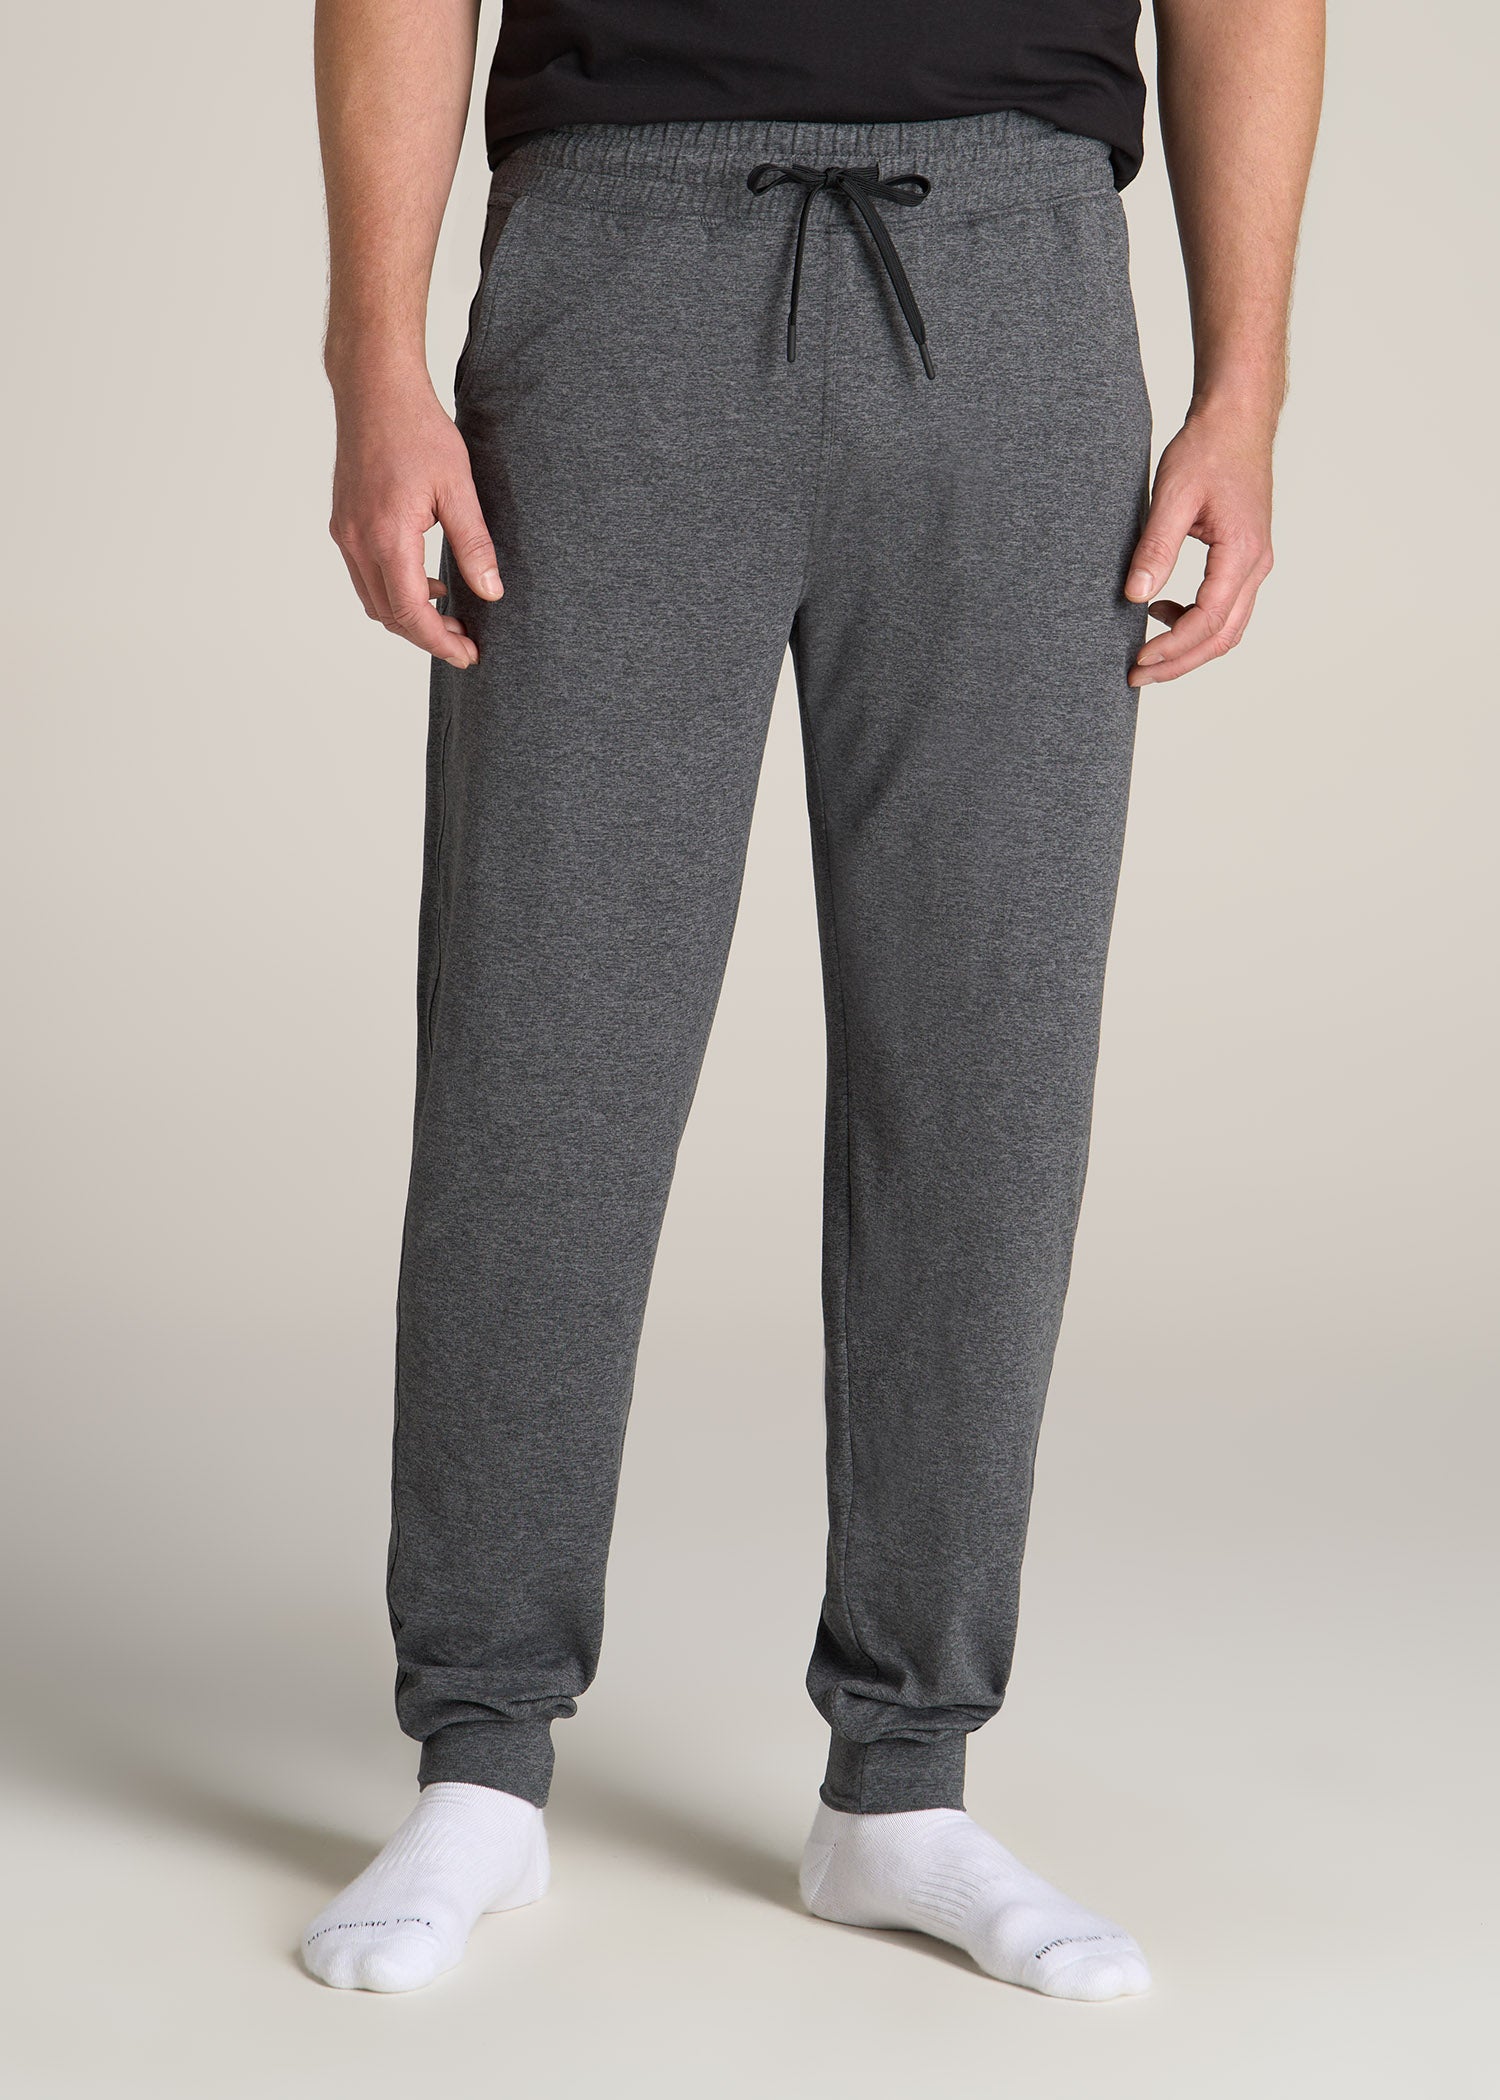 Weekender Stretch Lounge Joggers for Tall Men | American Tall